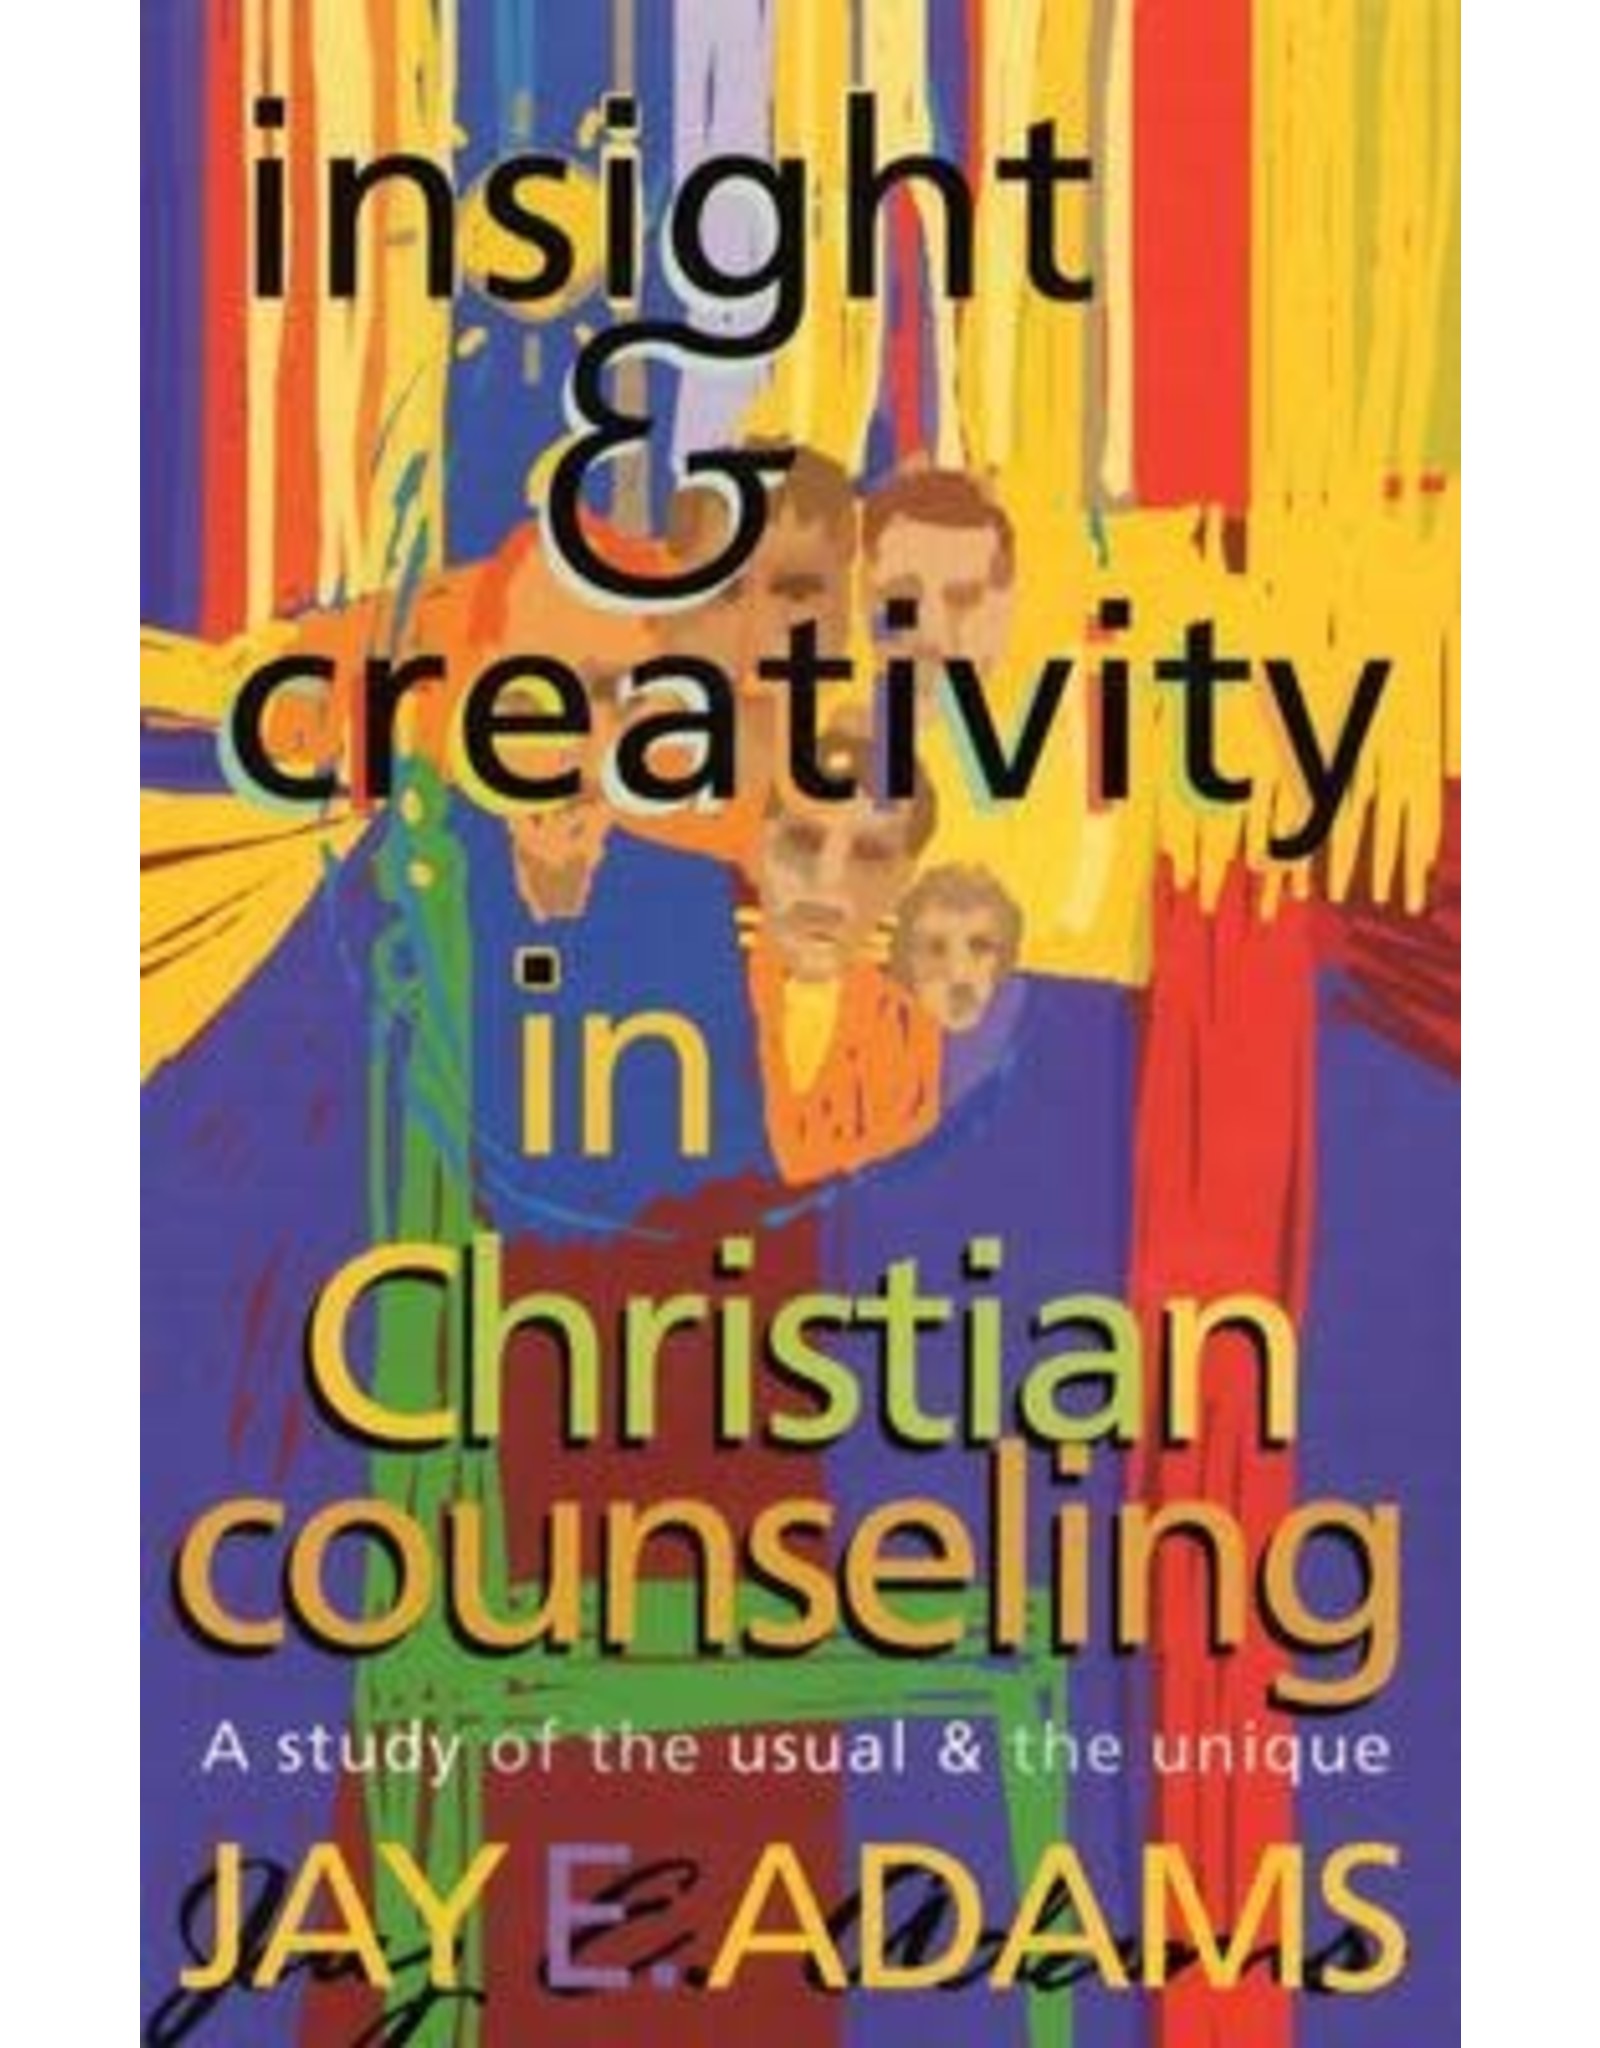 Jay E Adams Insight and Creativity in Christian Counselling